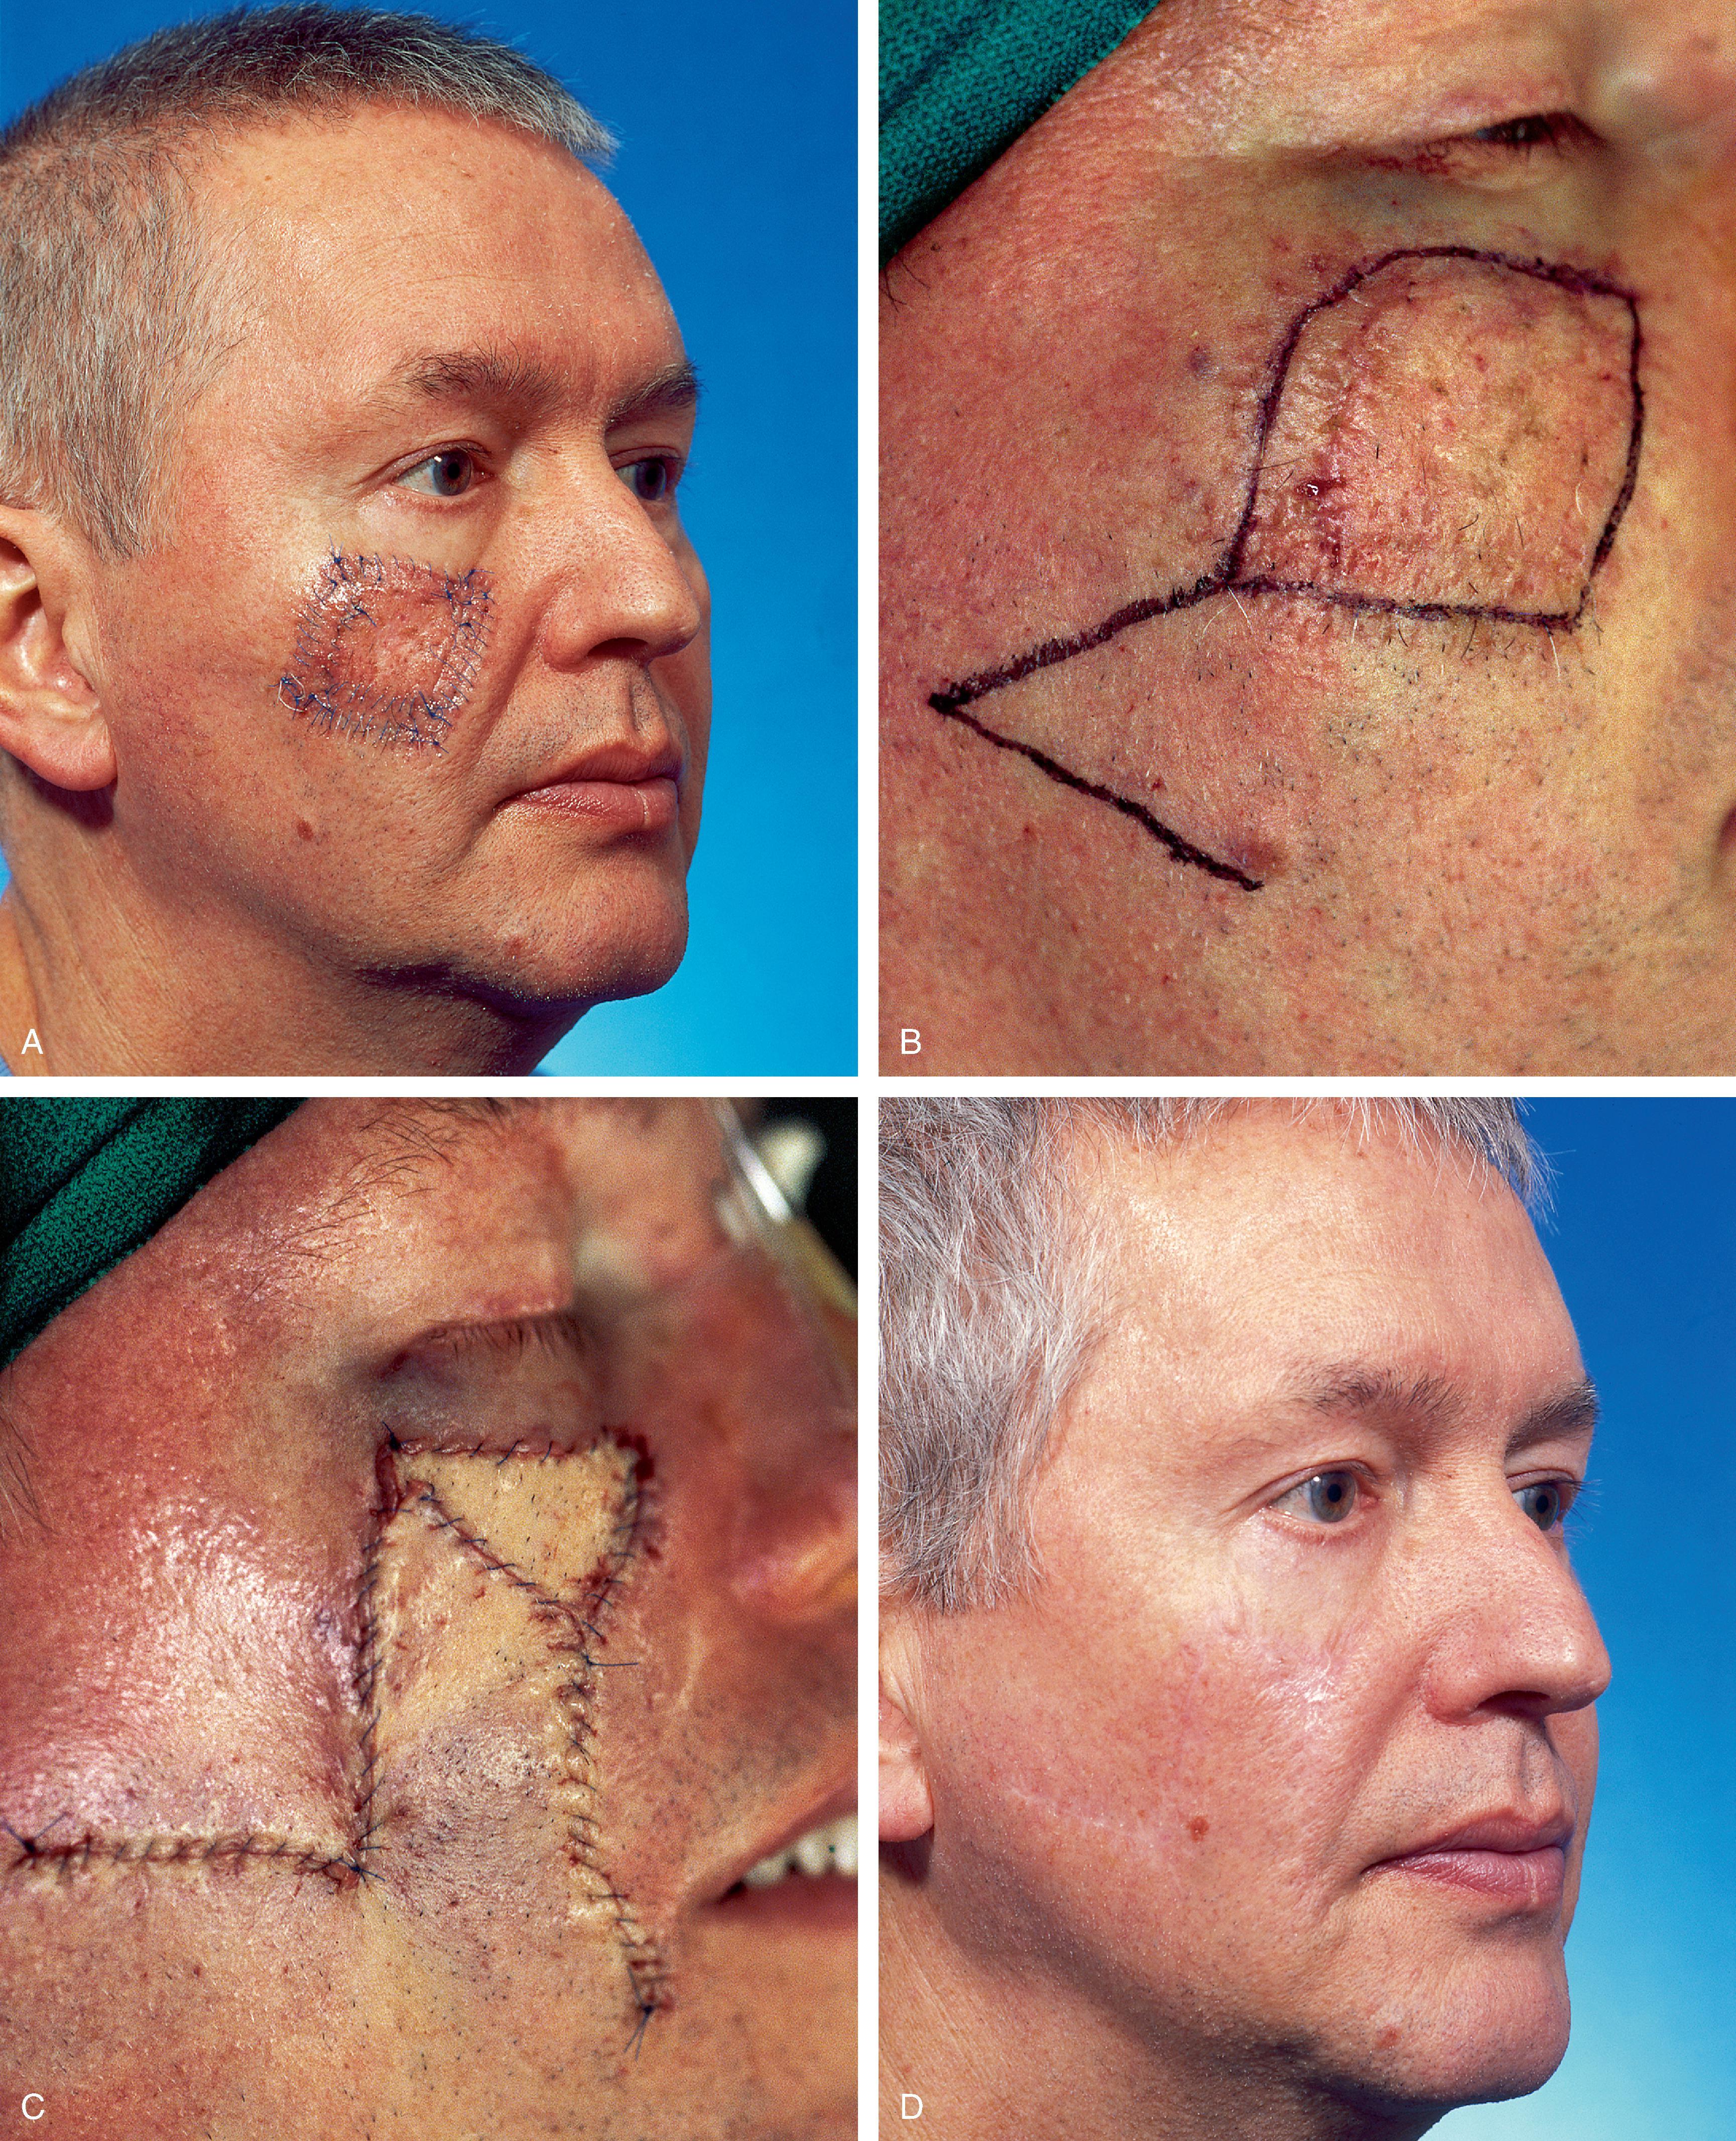 Fig. 16.1, Rhombic flap and full-thickness skin graft (FTSG). A , Atypical junctional melanocytic hyperplasia measuring 4 × 4 cm. Tumor-free margins around lesion determined by square technique. B , Inferiorly based rhombic flap designed for repair after excision of lesion. C , Transposed flap combined with 3.5 × 2 cm FTSG. Graft used to prevent downward traction on lower eyelid. Skin graft obtained from standing cutaneous deformity excised at base of flap. D . Thirteen months postoperative. No revision surgery performed.